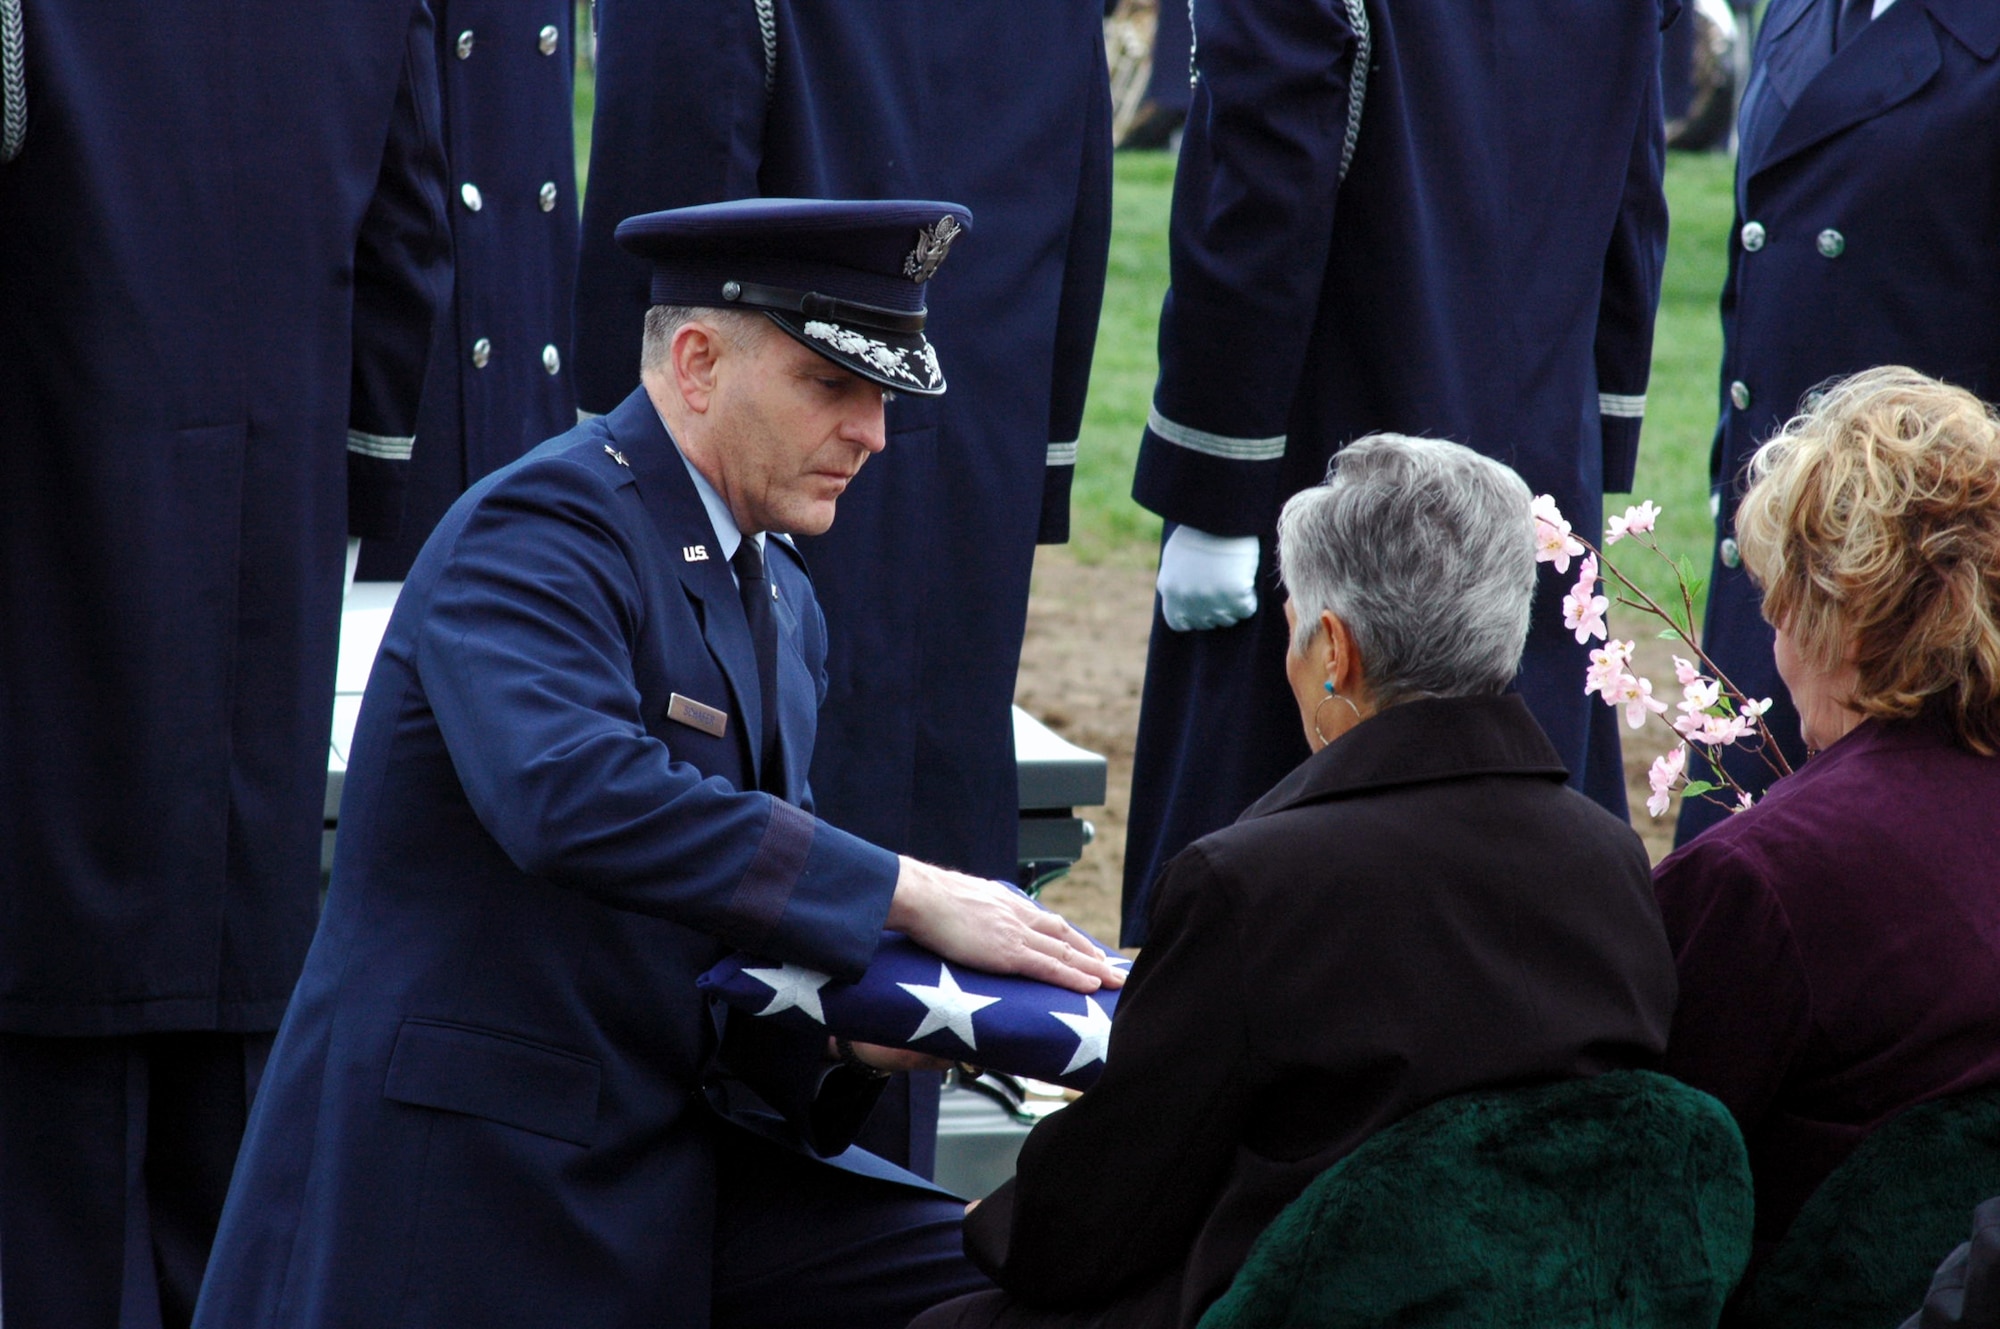 Brig. Gen. Paul Schafer, from the Office of the Secretary of Defense, presents the American flag to Mrs. Lana Taylor, oldest daughter of Maj. Robert F. Woods, during the funeral for Major Woods at Arlington National Cemetery, Va., April 9, 2008.  Major Woods was buried at Arlington nearly 40 years after he disappeared.  On Nov. 30, 2007, the Department of Defense announced they had positively identified Major Woods after a recovering remains in Vietnam.  (U.S. Air Force Photo/Tech. Sgt. Scott T. Sturkol)